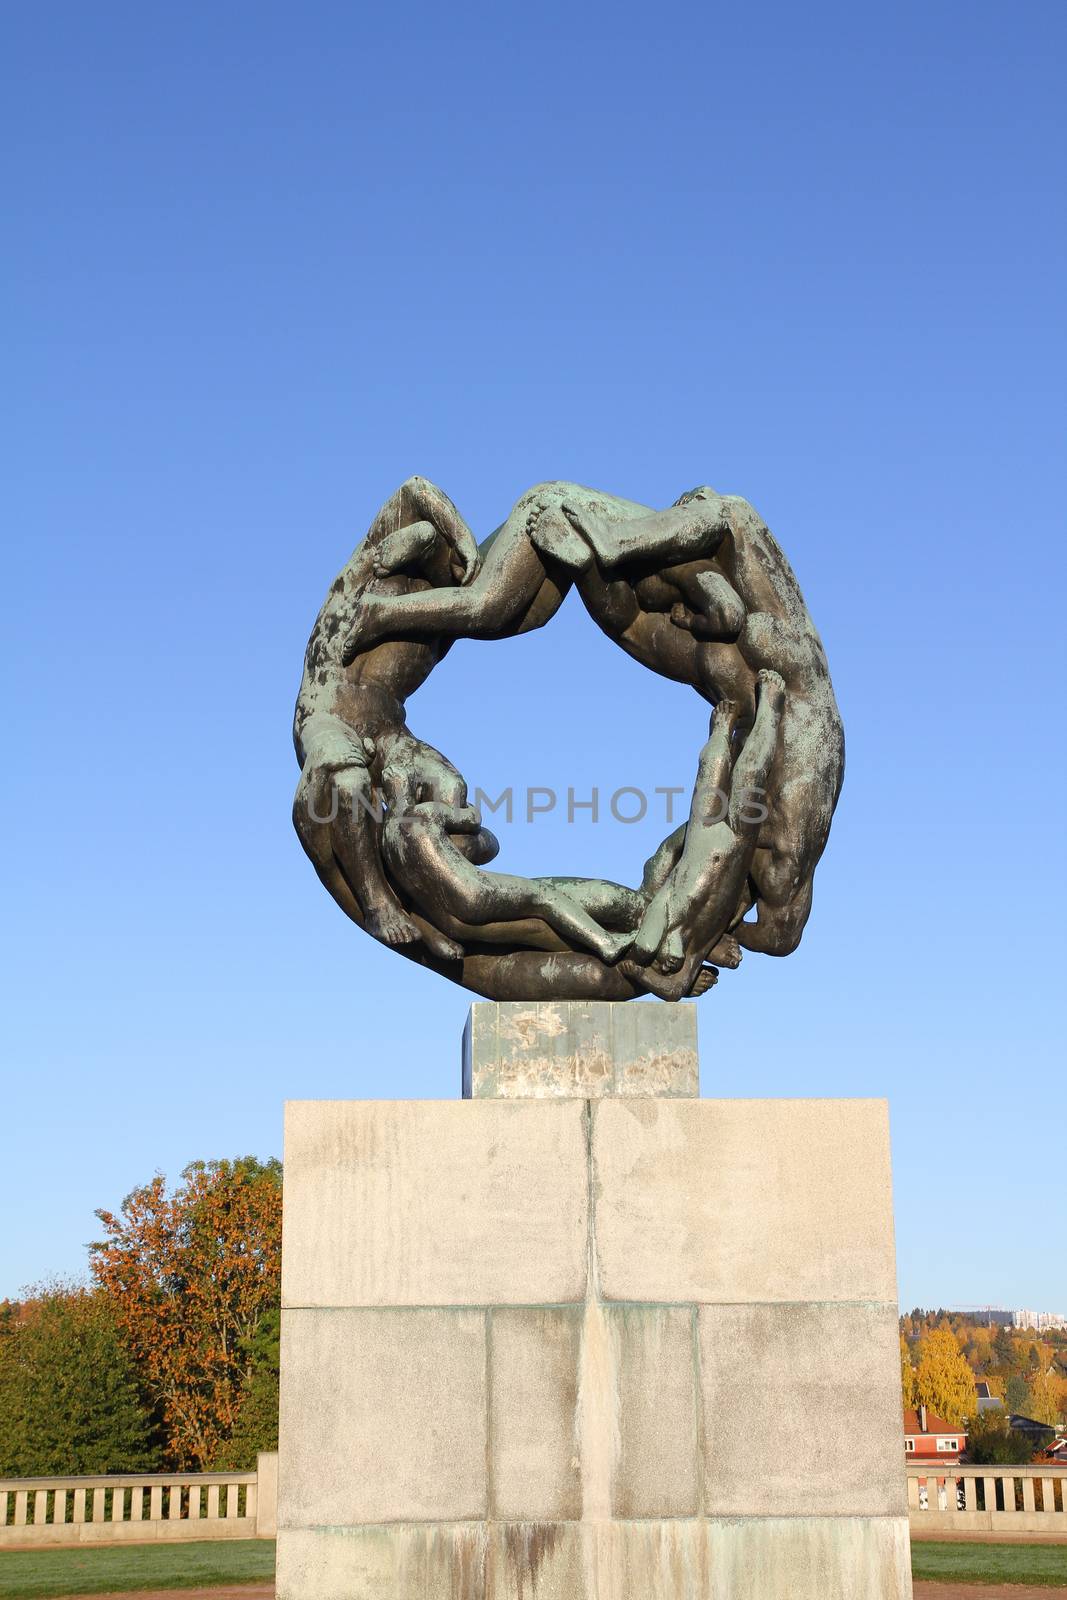 OSLO - NORWAY - NOVEMBER 13: Bronze fountain  in Vigeland's scul by pumppump